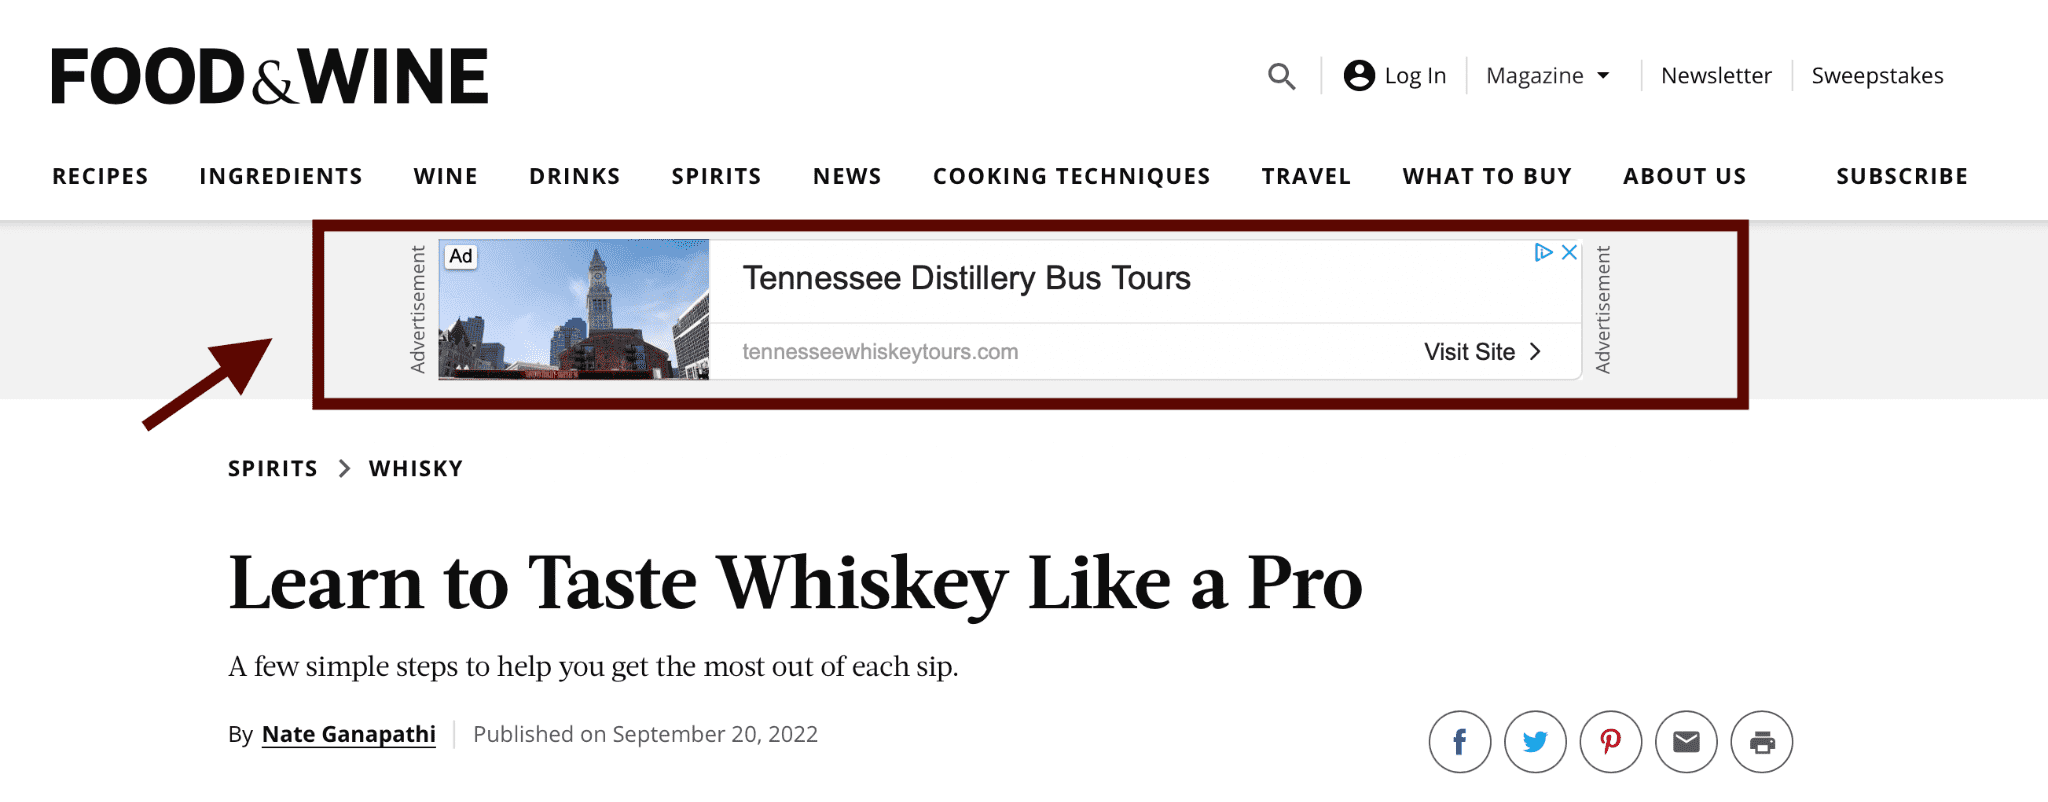 Display banner ad for Tennesee Distillery Bus Tours highlighted at the top of the Food & Wine website.